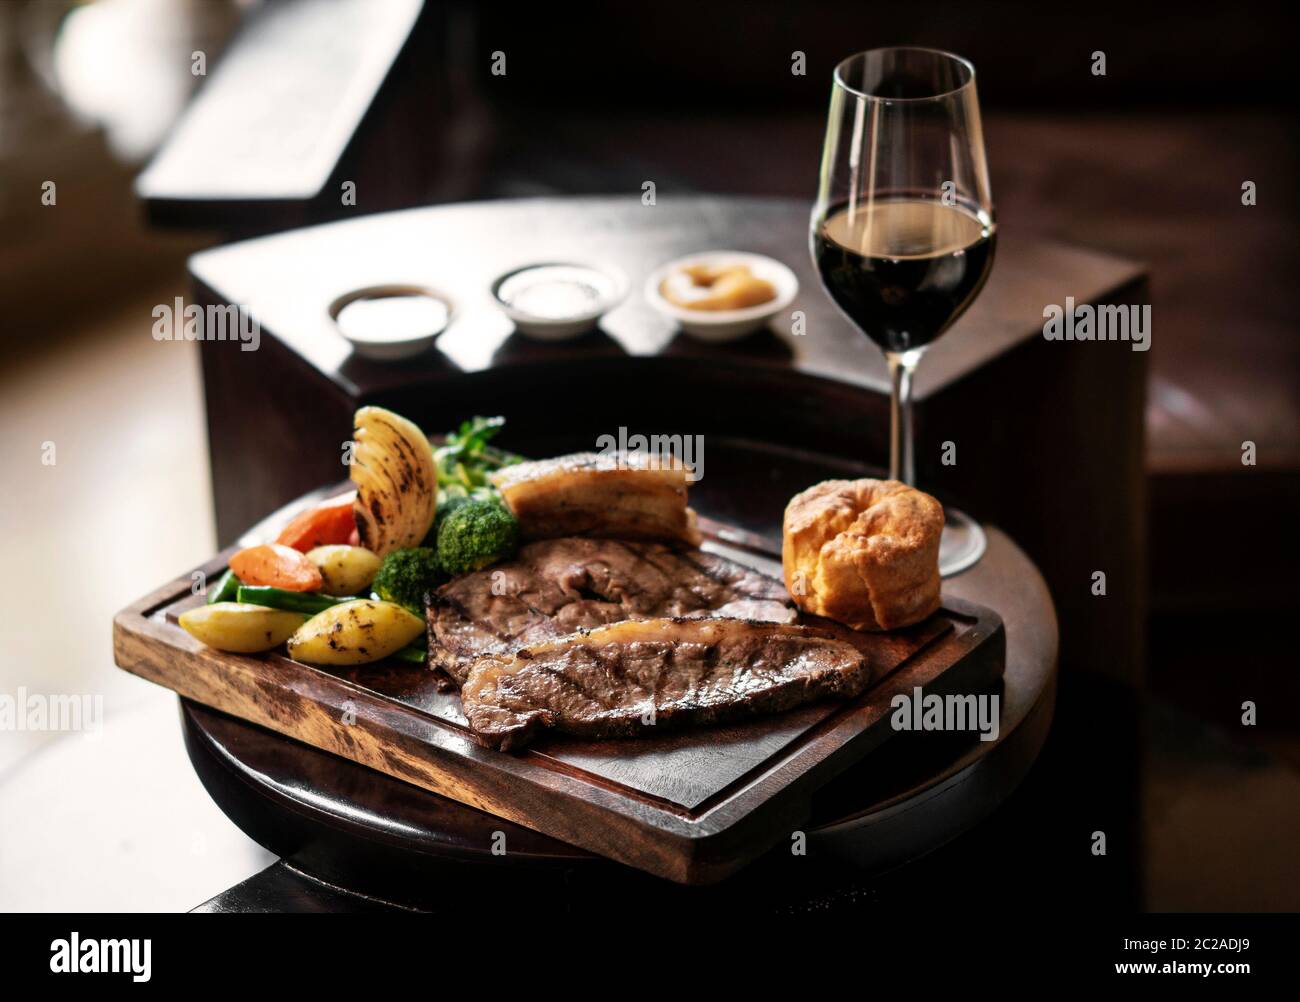 gourmet sunday roast beef traditional british meal set on old wooden pub table Stock Photo